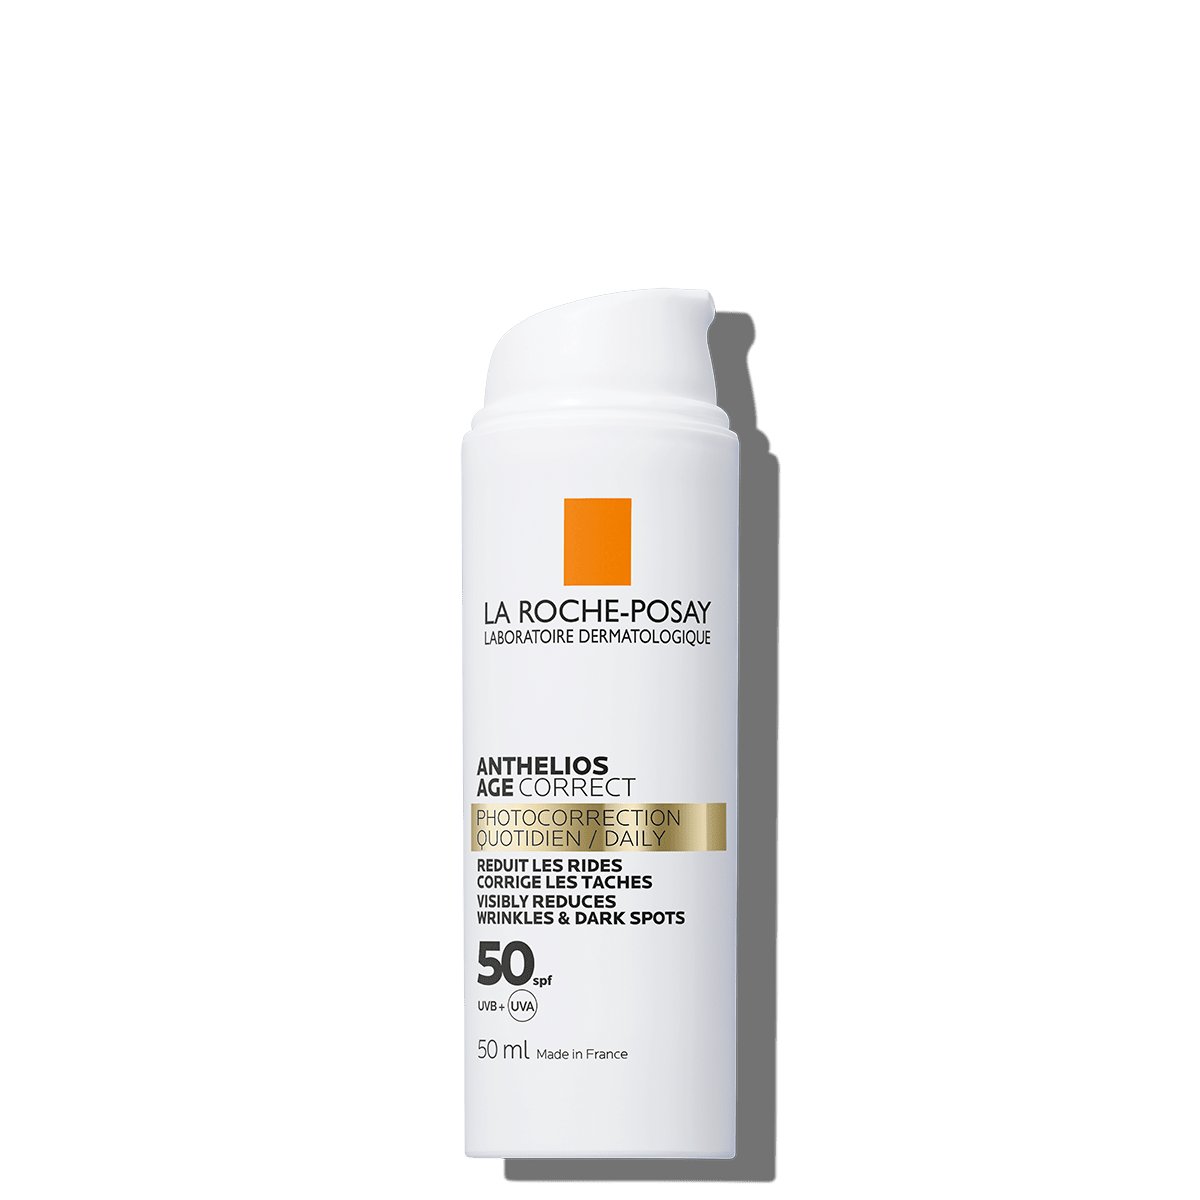 La-Roche-Posay-Anthelios-Age-Correct-SPF50-50ml-NoTeinted-LD-000-3337875761031-Open-FSS